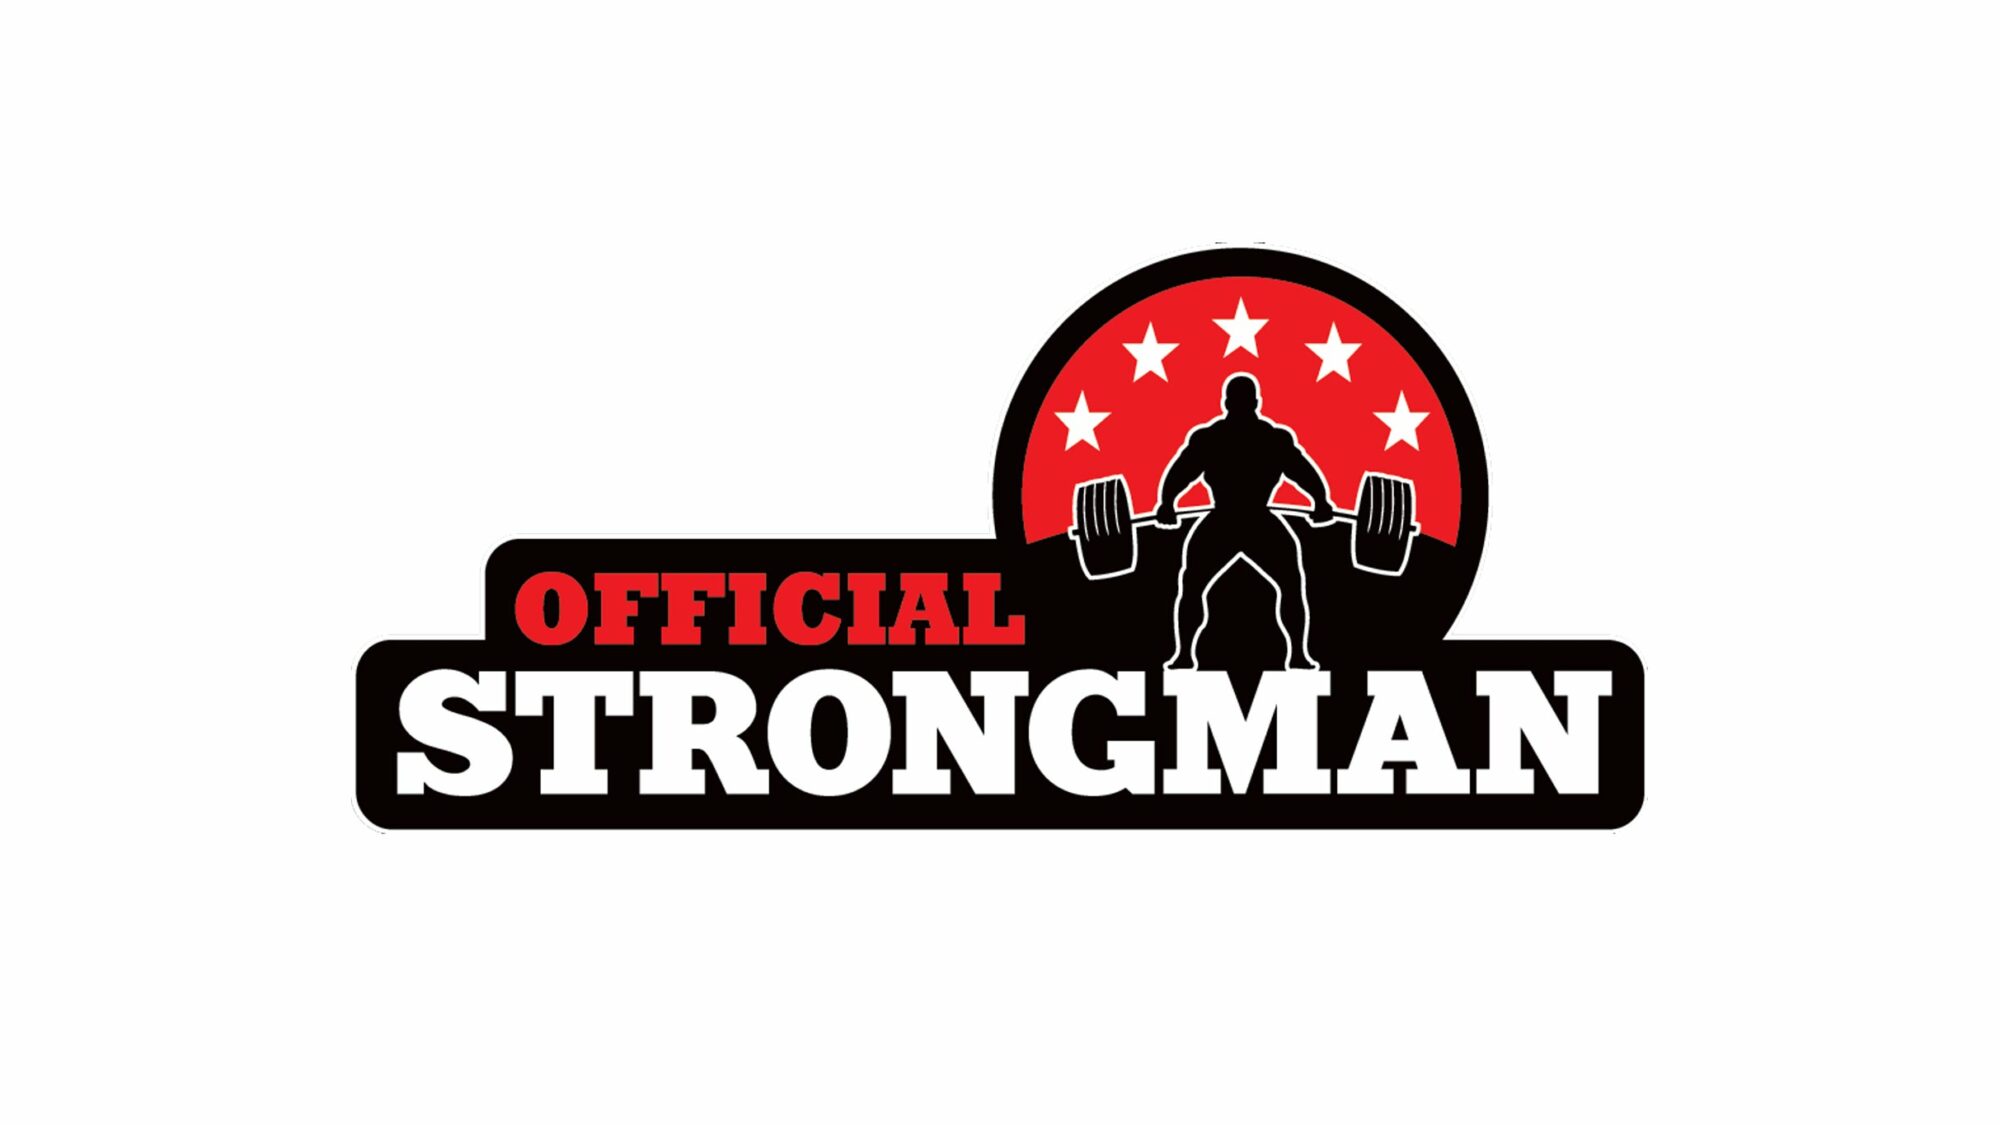 Image name Official Strongman European Championships Weekend Ticket at York Barbican York the 23 image from the post Events in Yorkshire.com.